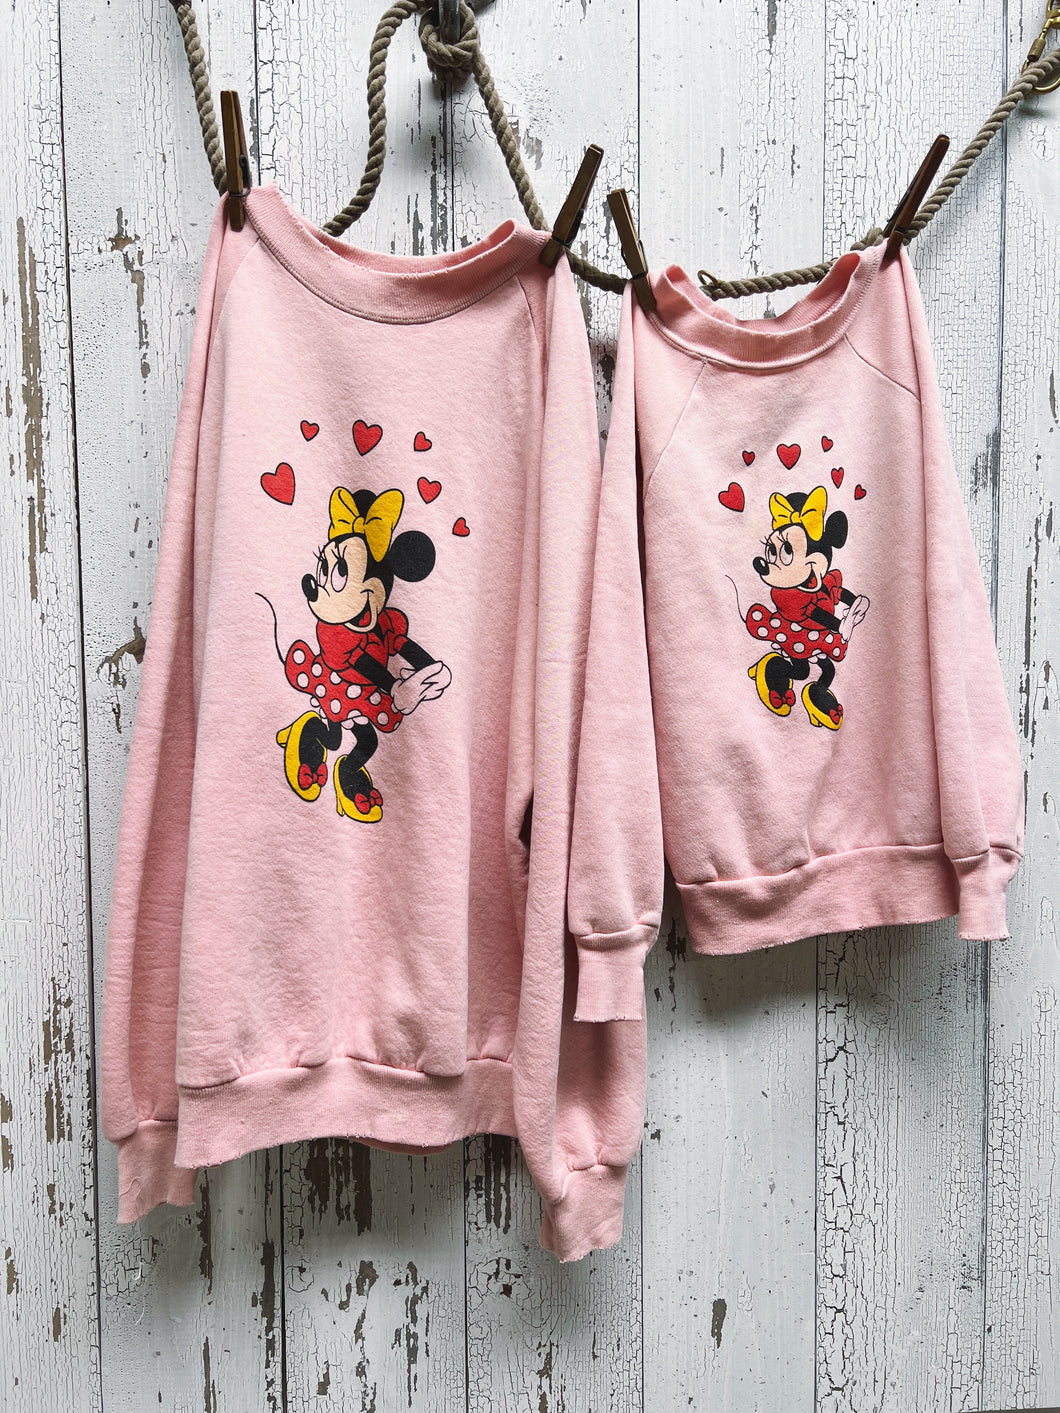 Vintage Mommy & Me Minnie Sweatshirt-Adult M & Kid's M (5-6) Customize Your Embroidery Wording